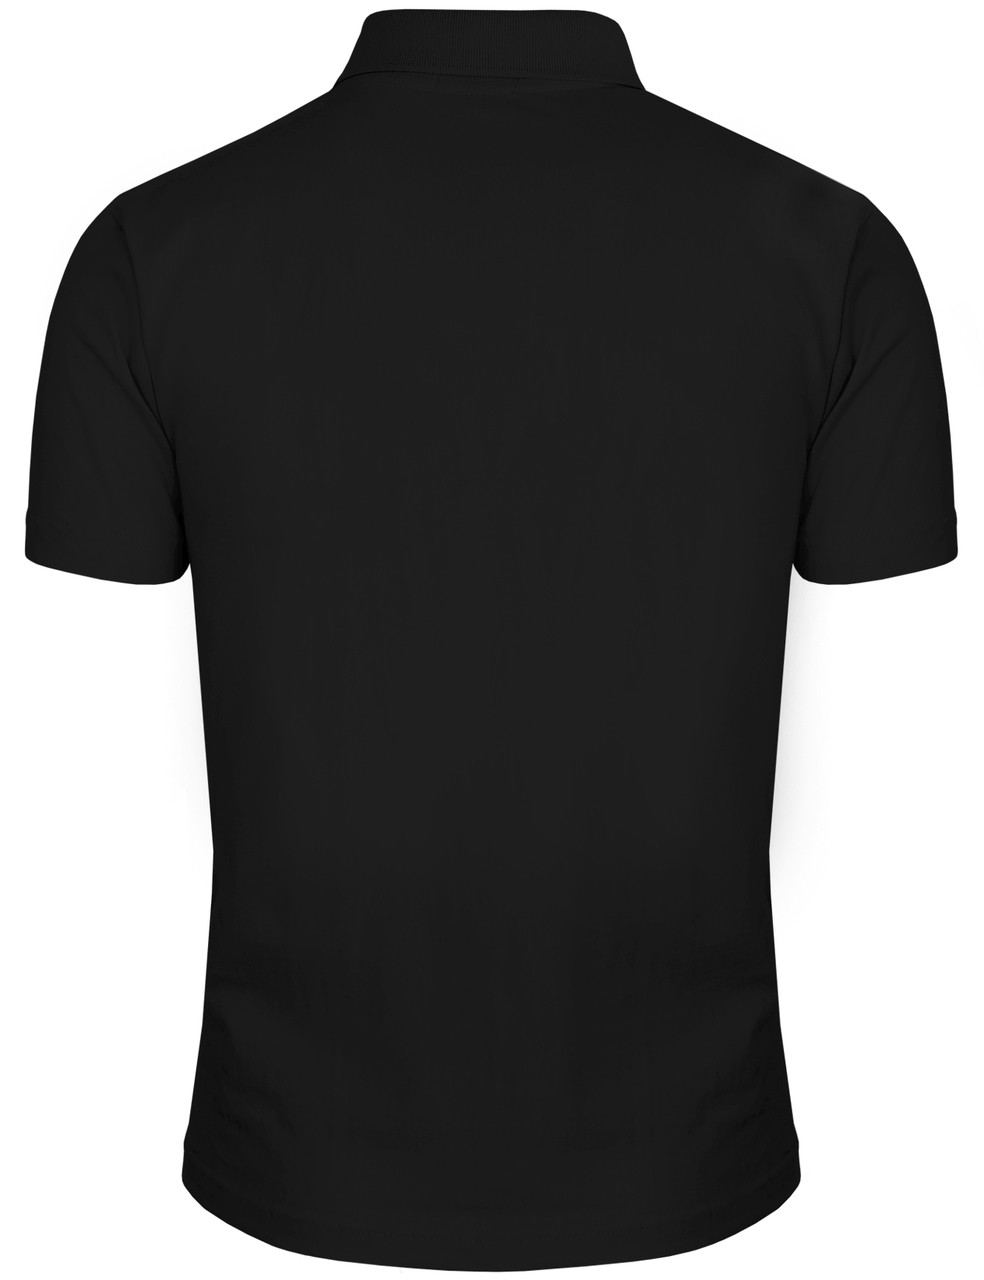 Black Polo T-shirt Mock Up, Front And Back View, Male Model Wear Plain ...